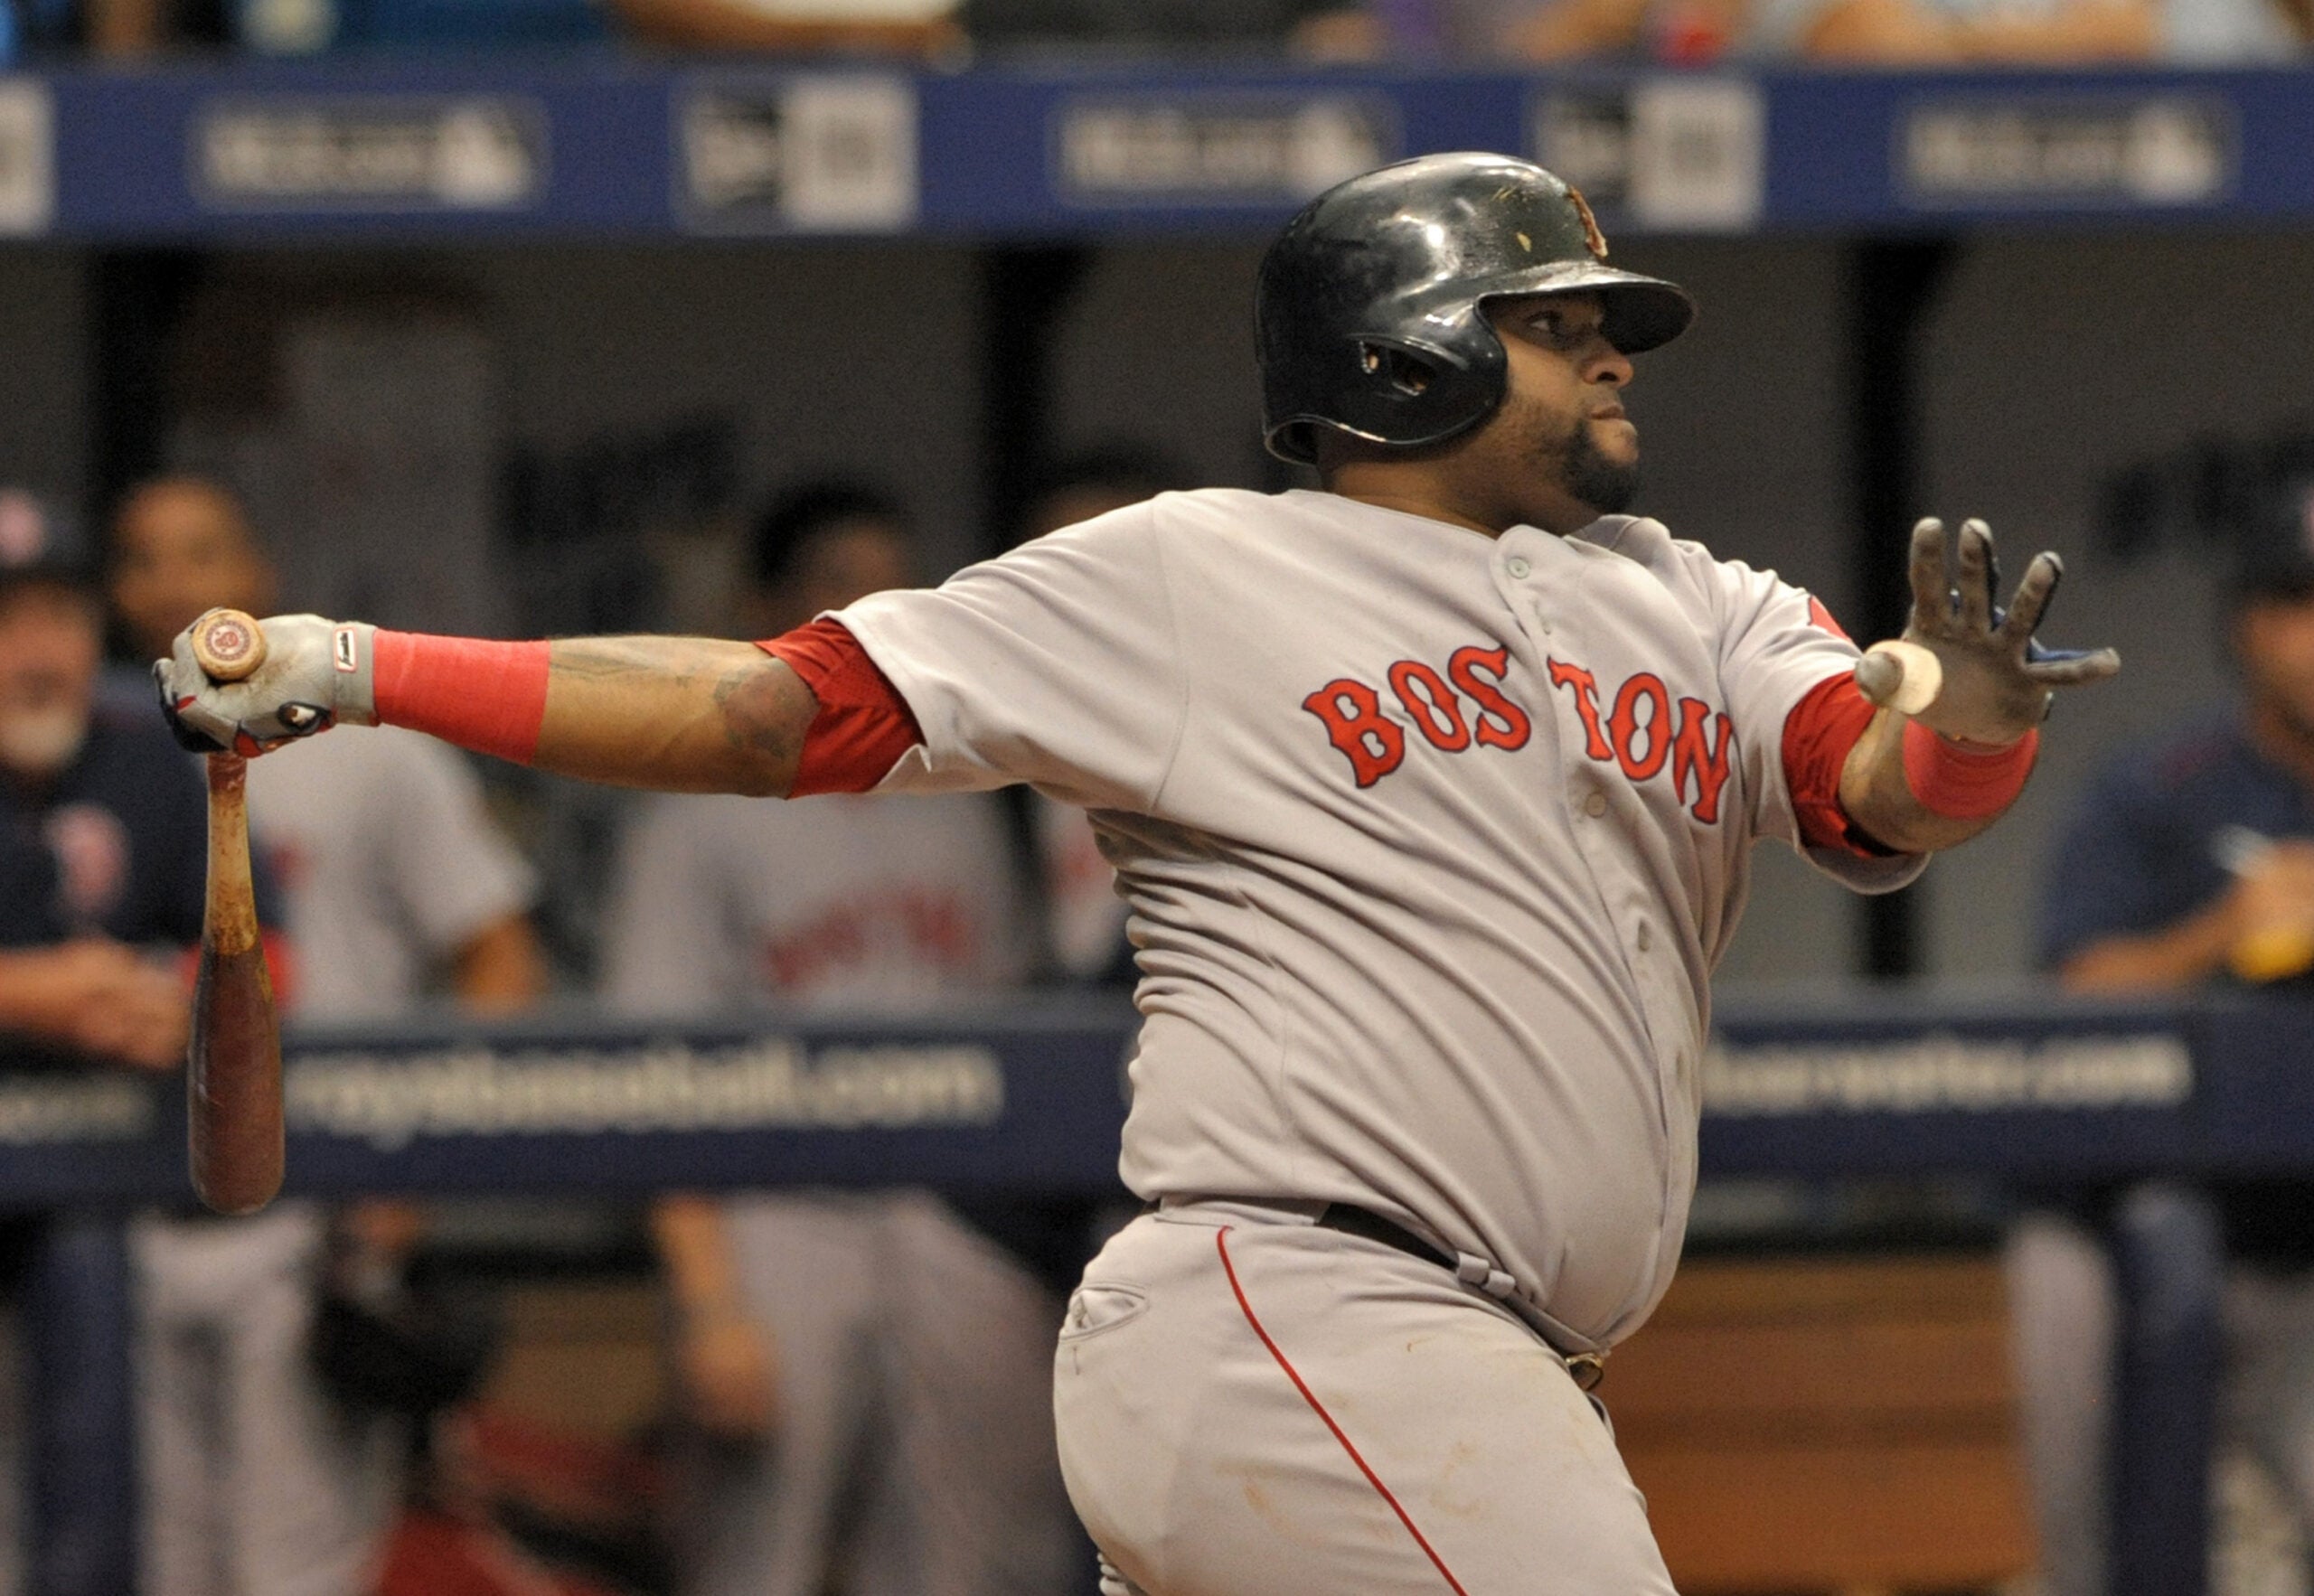 Watch: Pablo Sandoval swings at pitch above his head